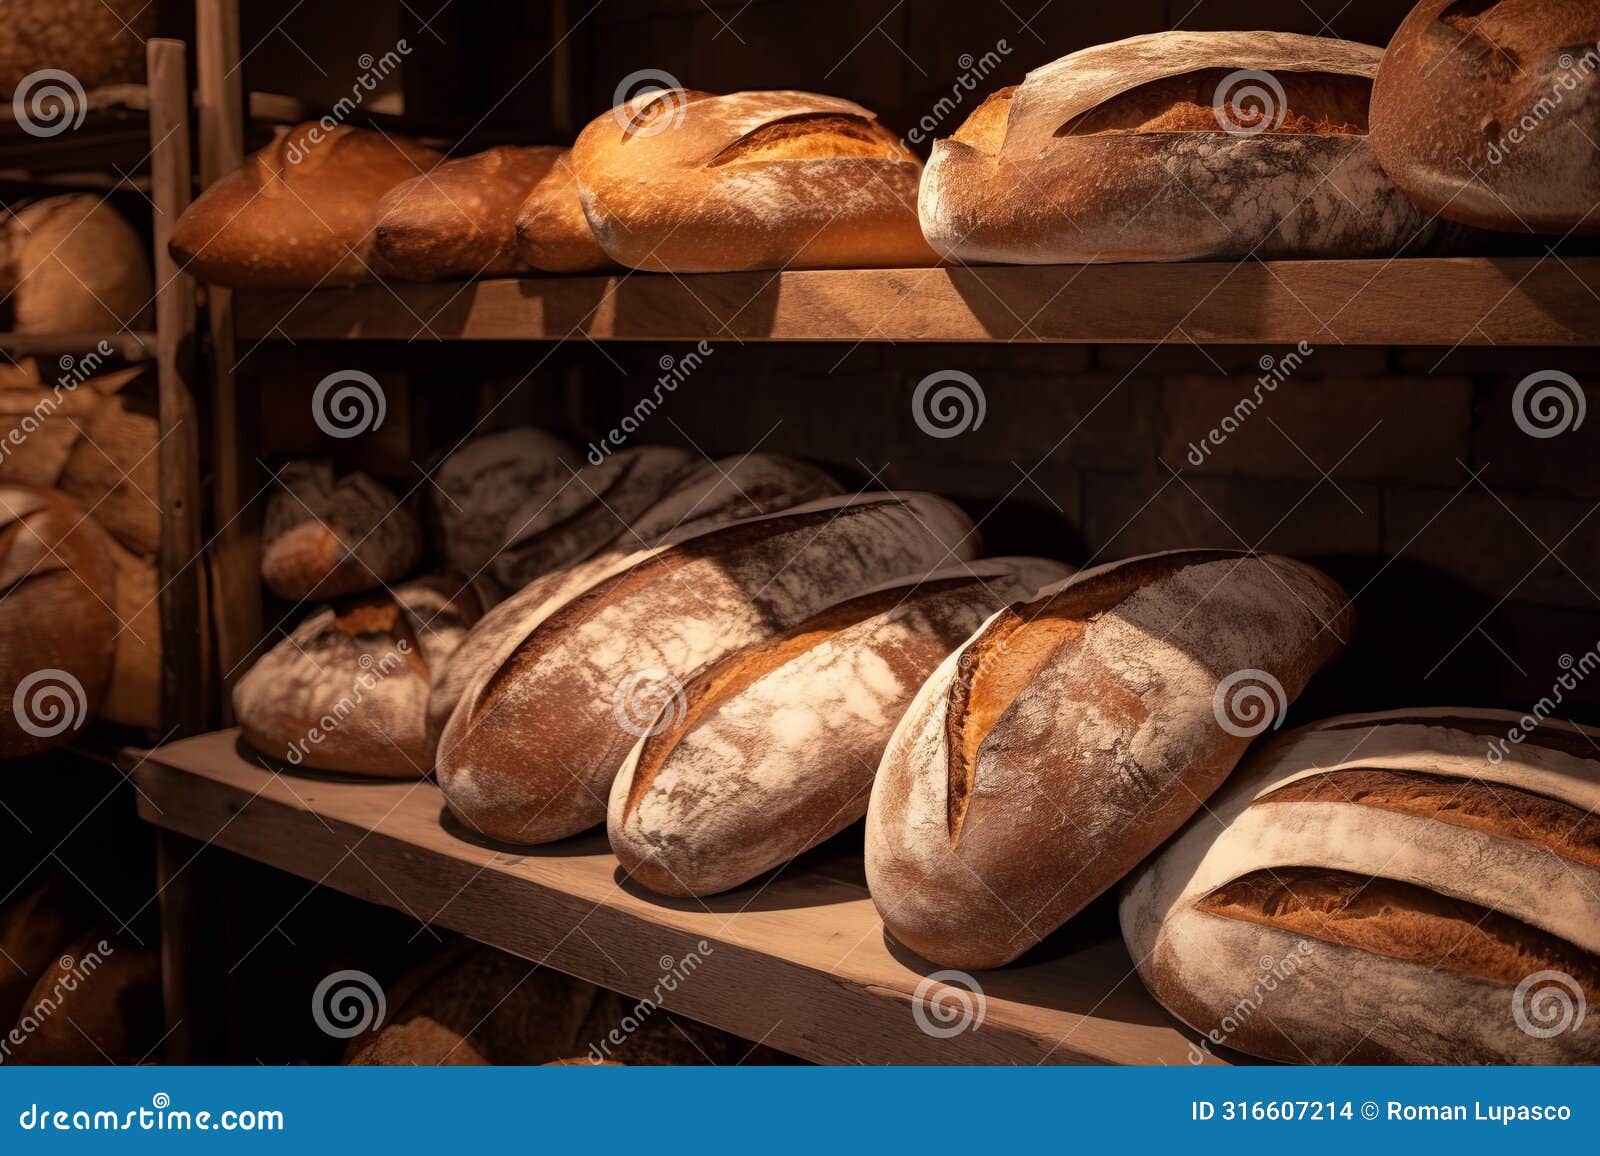 freshly baked breads in bakery. generate ai